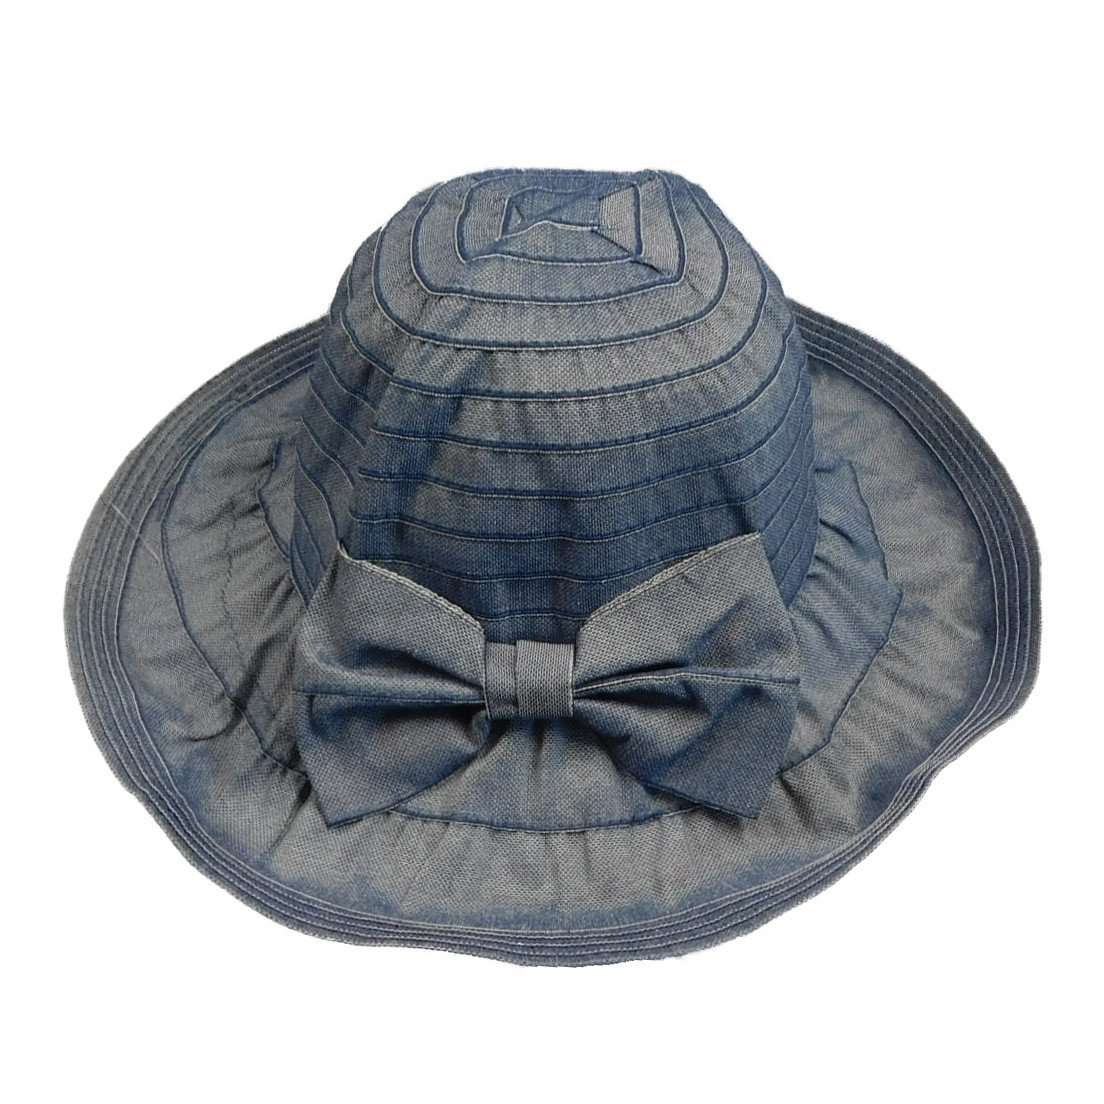 Pulled Ribbon Sun Hat with Bow by JSA for Women Wide Brim Hat Jeanne Simmons js9215BL Blue  